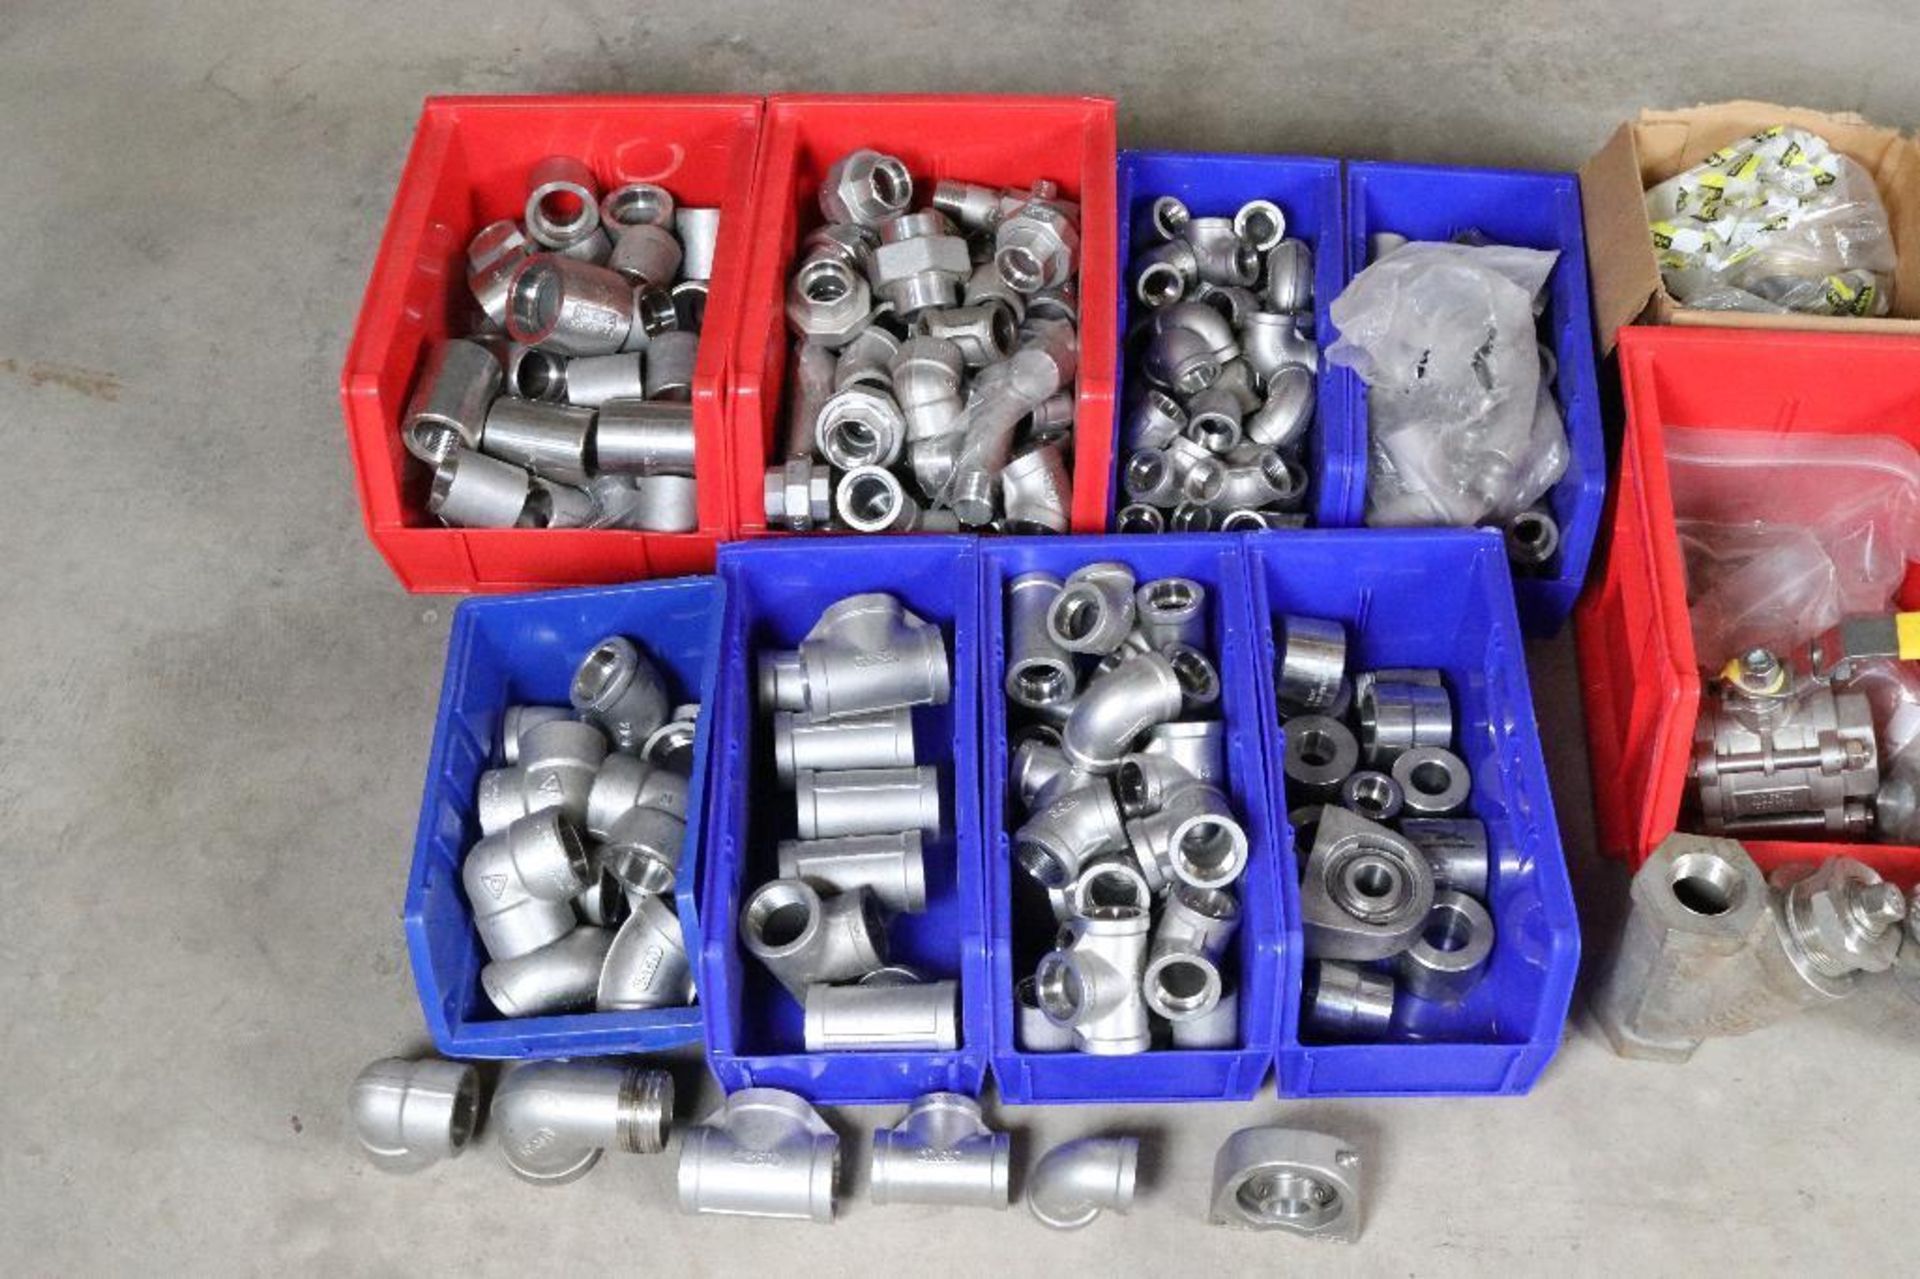 Assortment of Stainless Fittings and Valves. See Photos for Full Details - Image 6 of 8